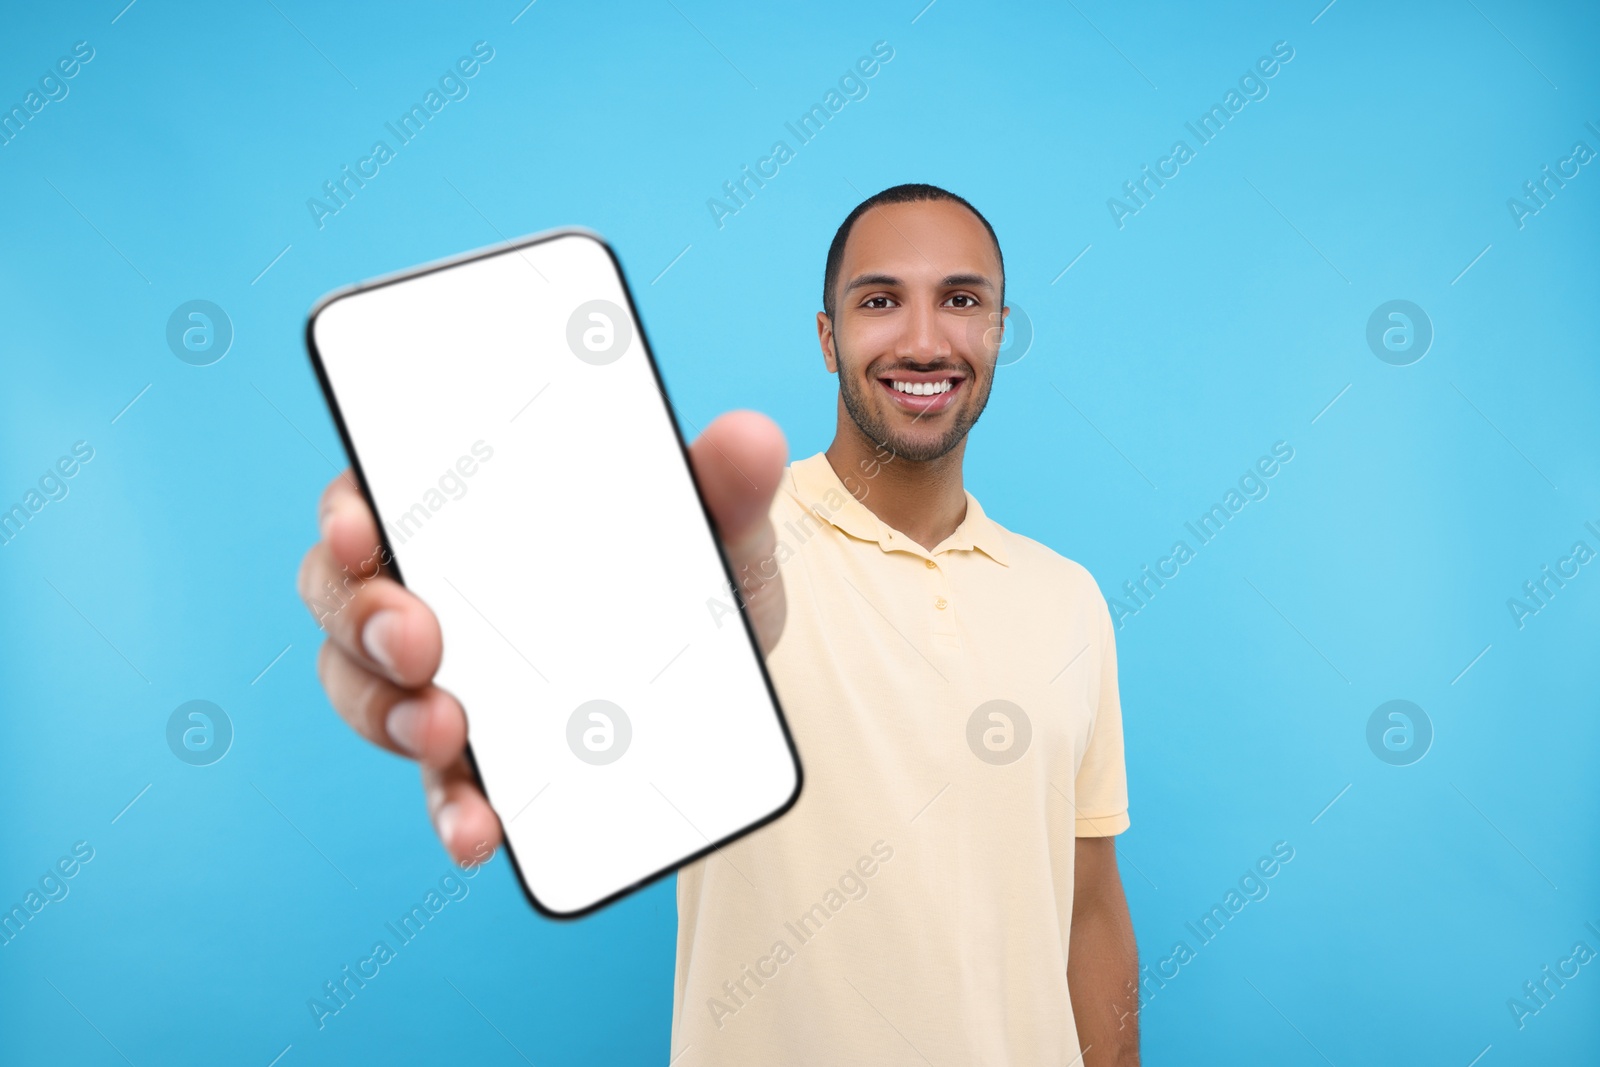 Photo of Young man showing smartphone in hand on light blue background